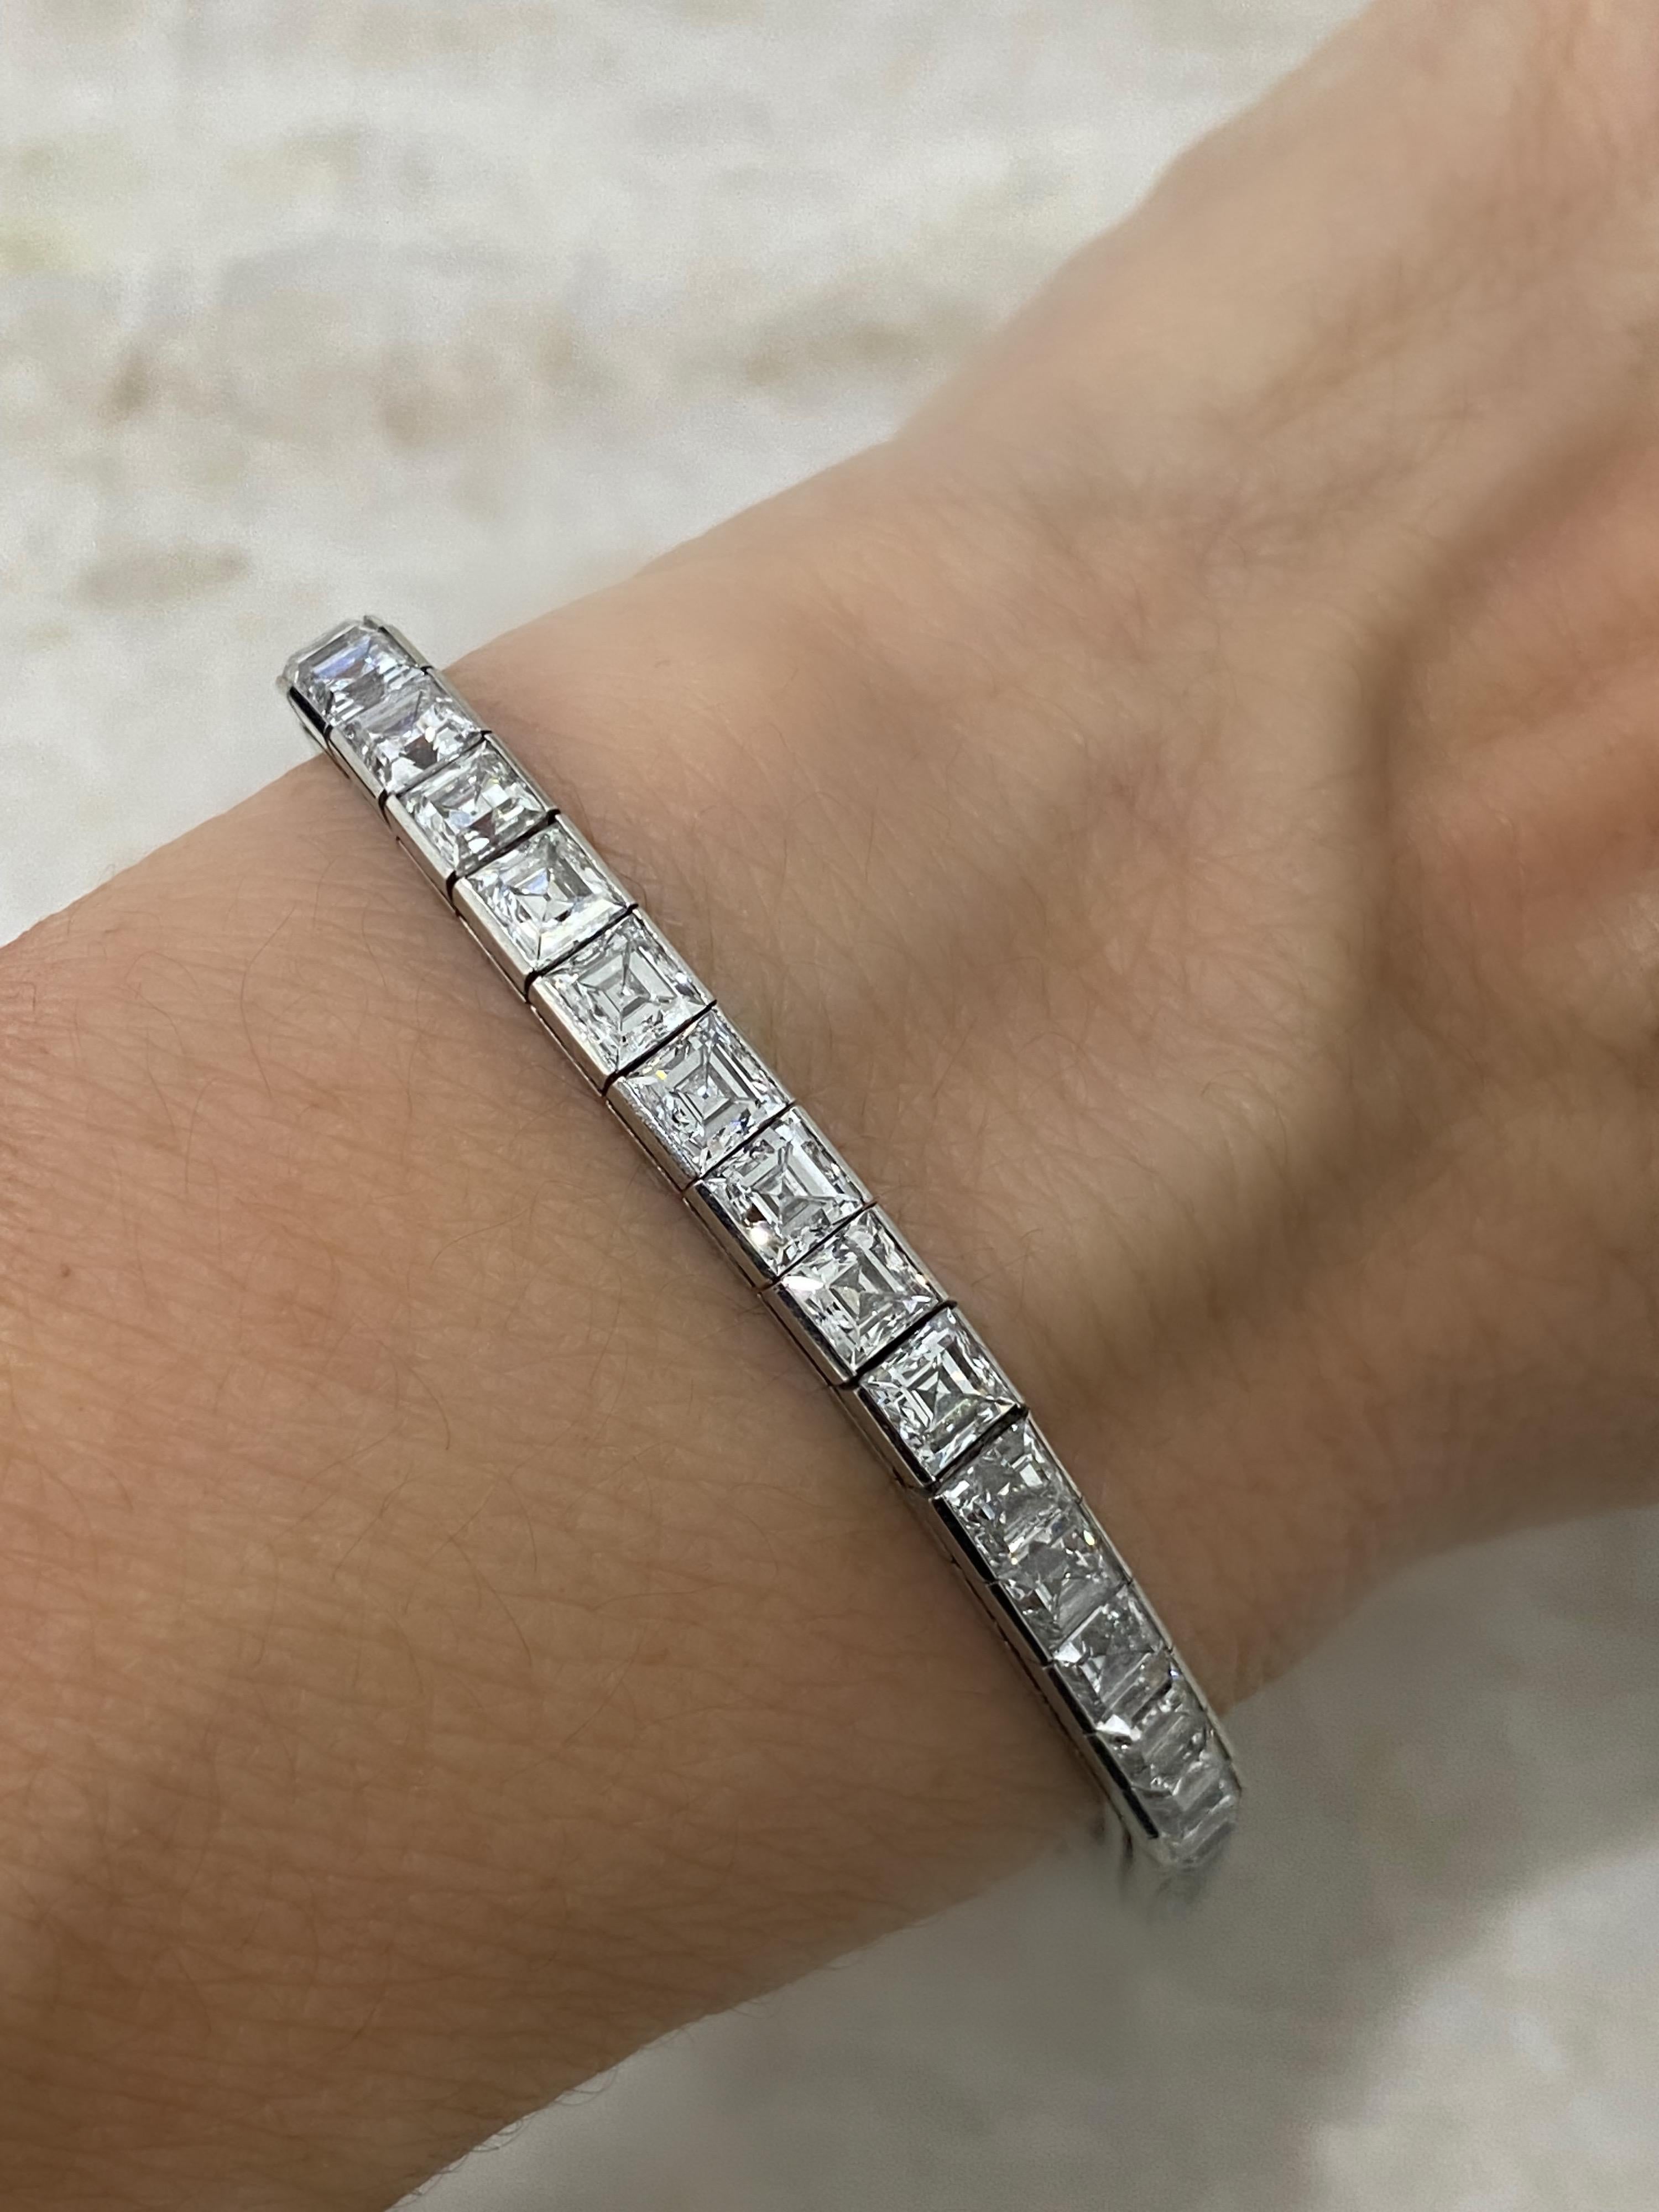 This 17 Carat diamond platinum bracelet is an excellent piece of jewelry; it is of outstanding quality and has a spectacular style - perfect for any special occasion. This bracelet, with approximately 17 Carats of 47 Asscher Cut Diamonds set in a